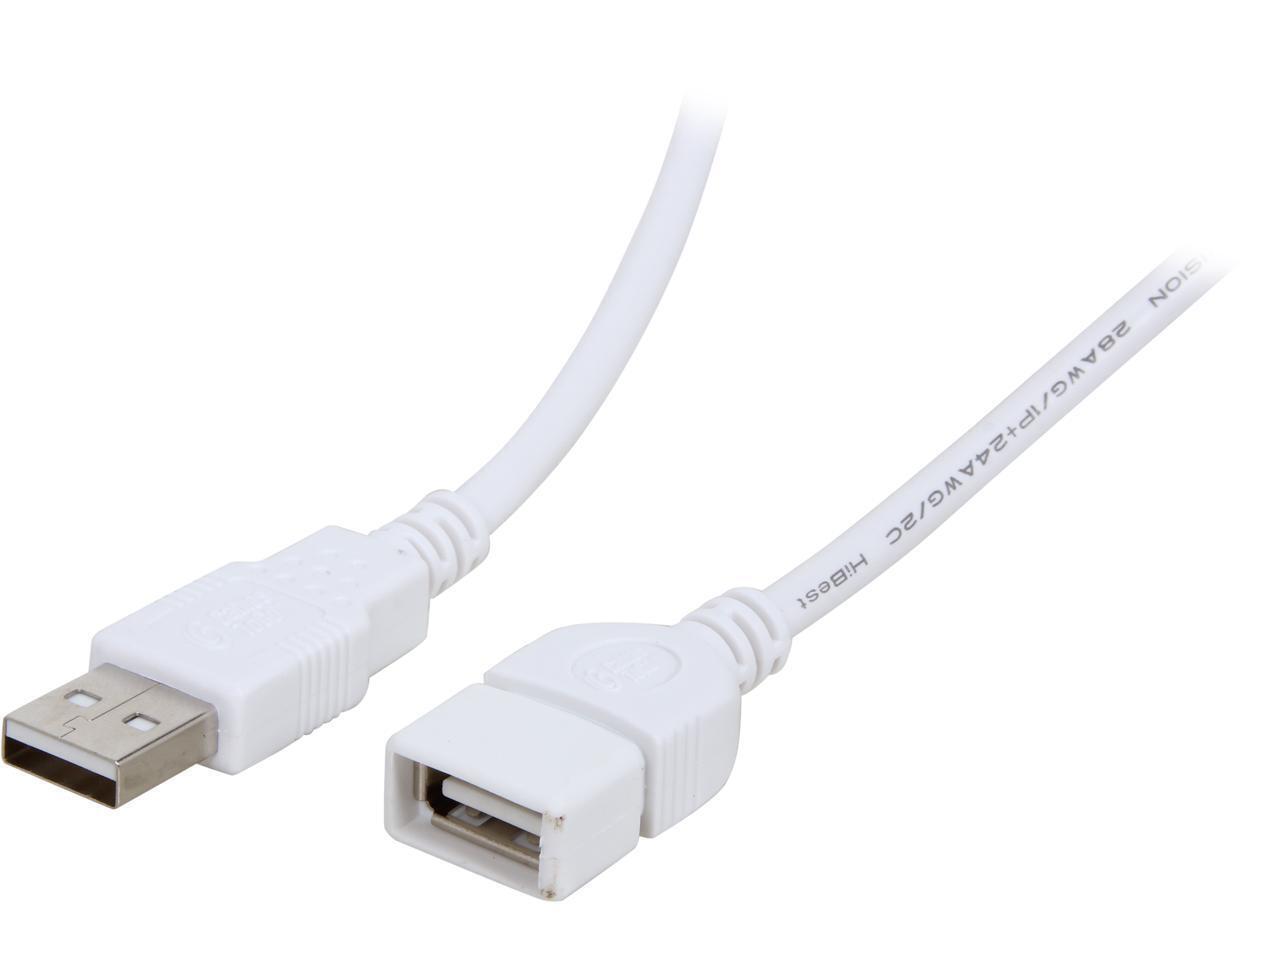 C2G 19018 2m USB 2.0 A Male to A Female Extension Cable - White